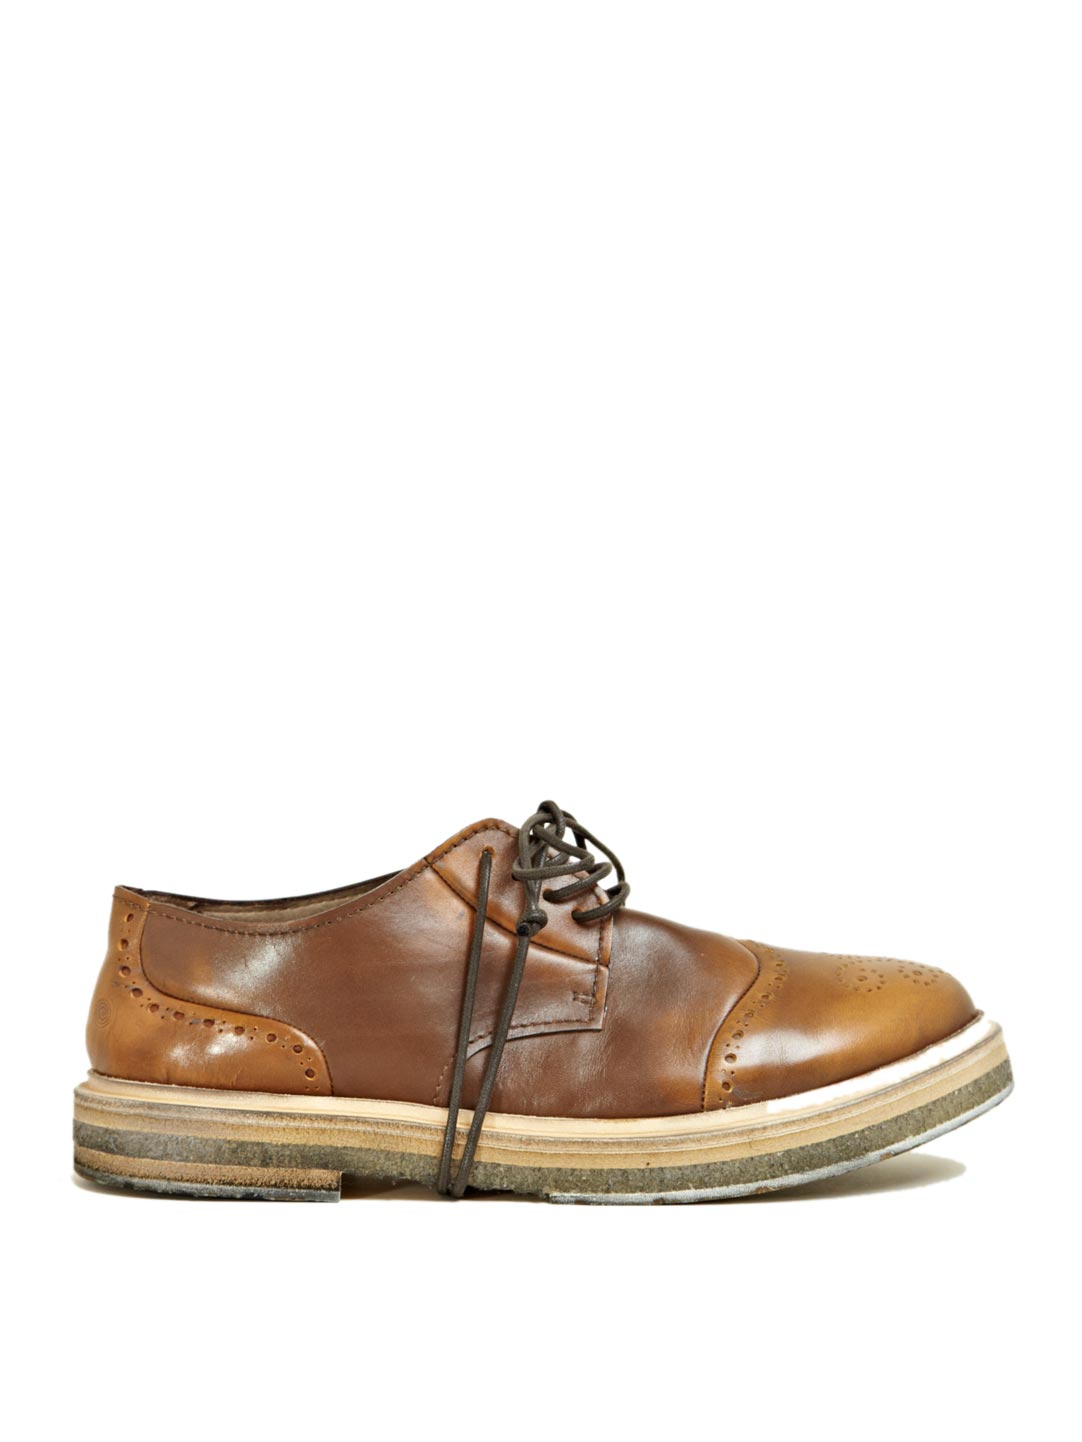 Marsèll Marsell Mens Brogue Barcellona Senape Shoes in Brown for Men - Lyst